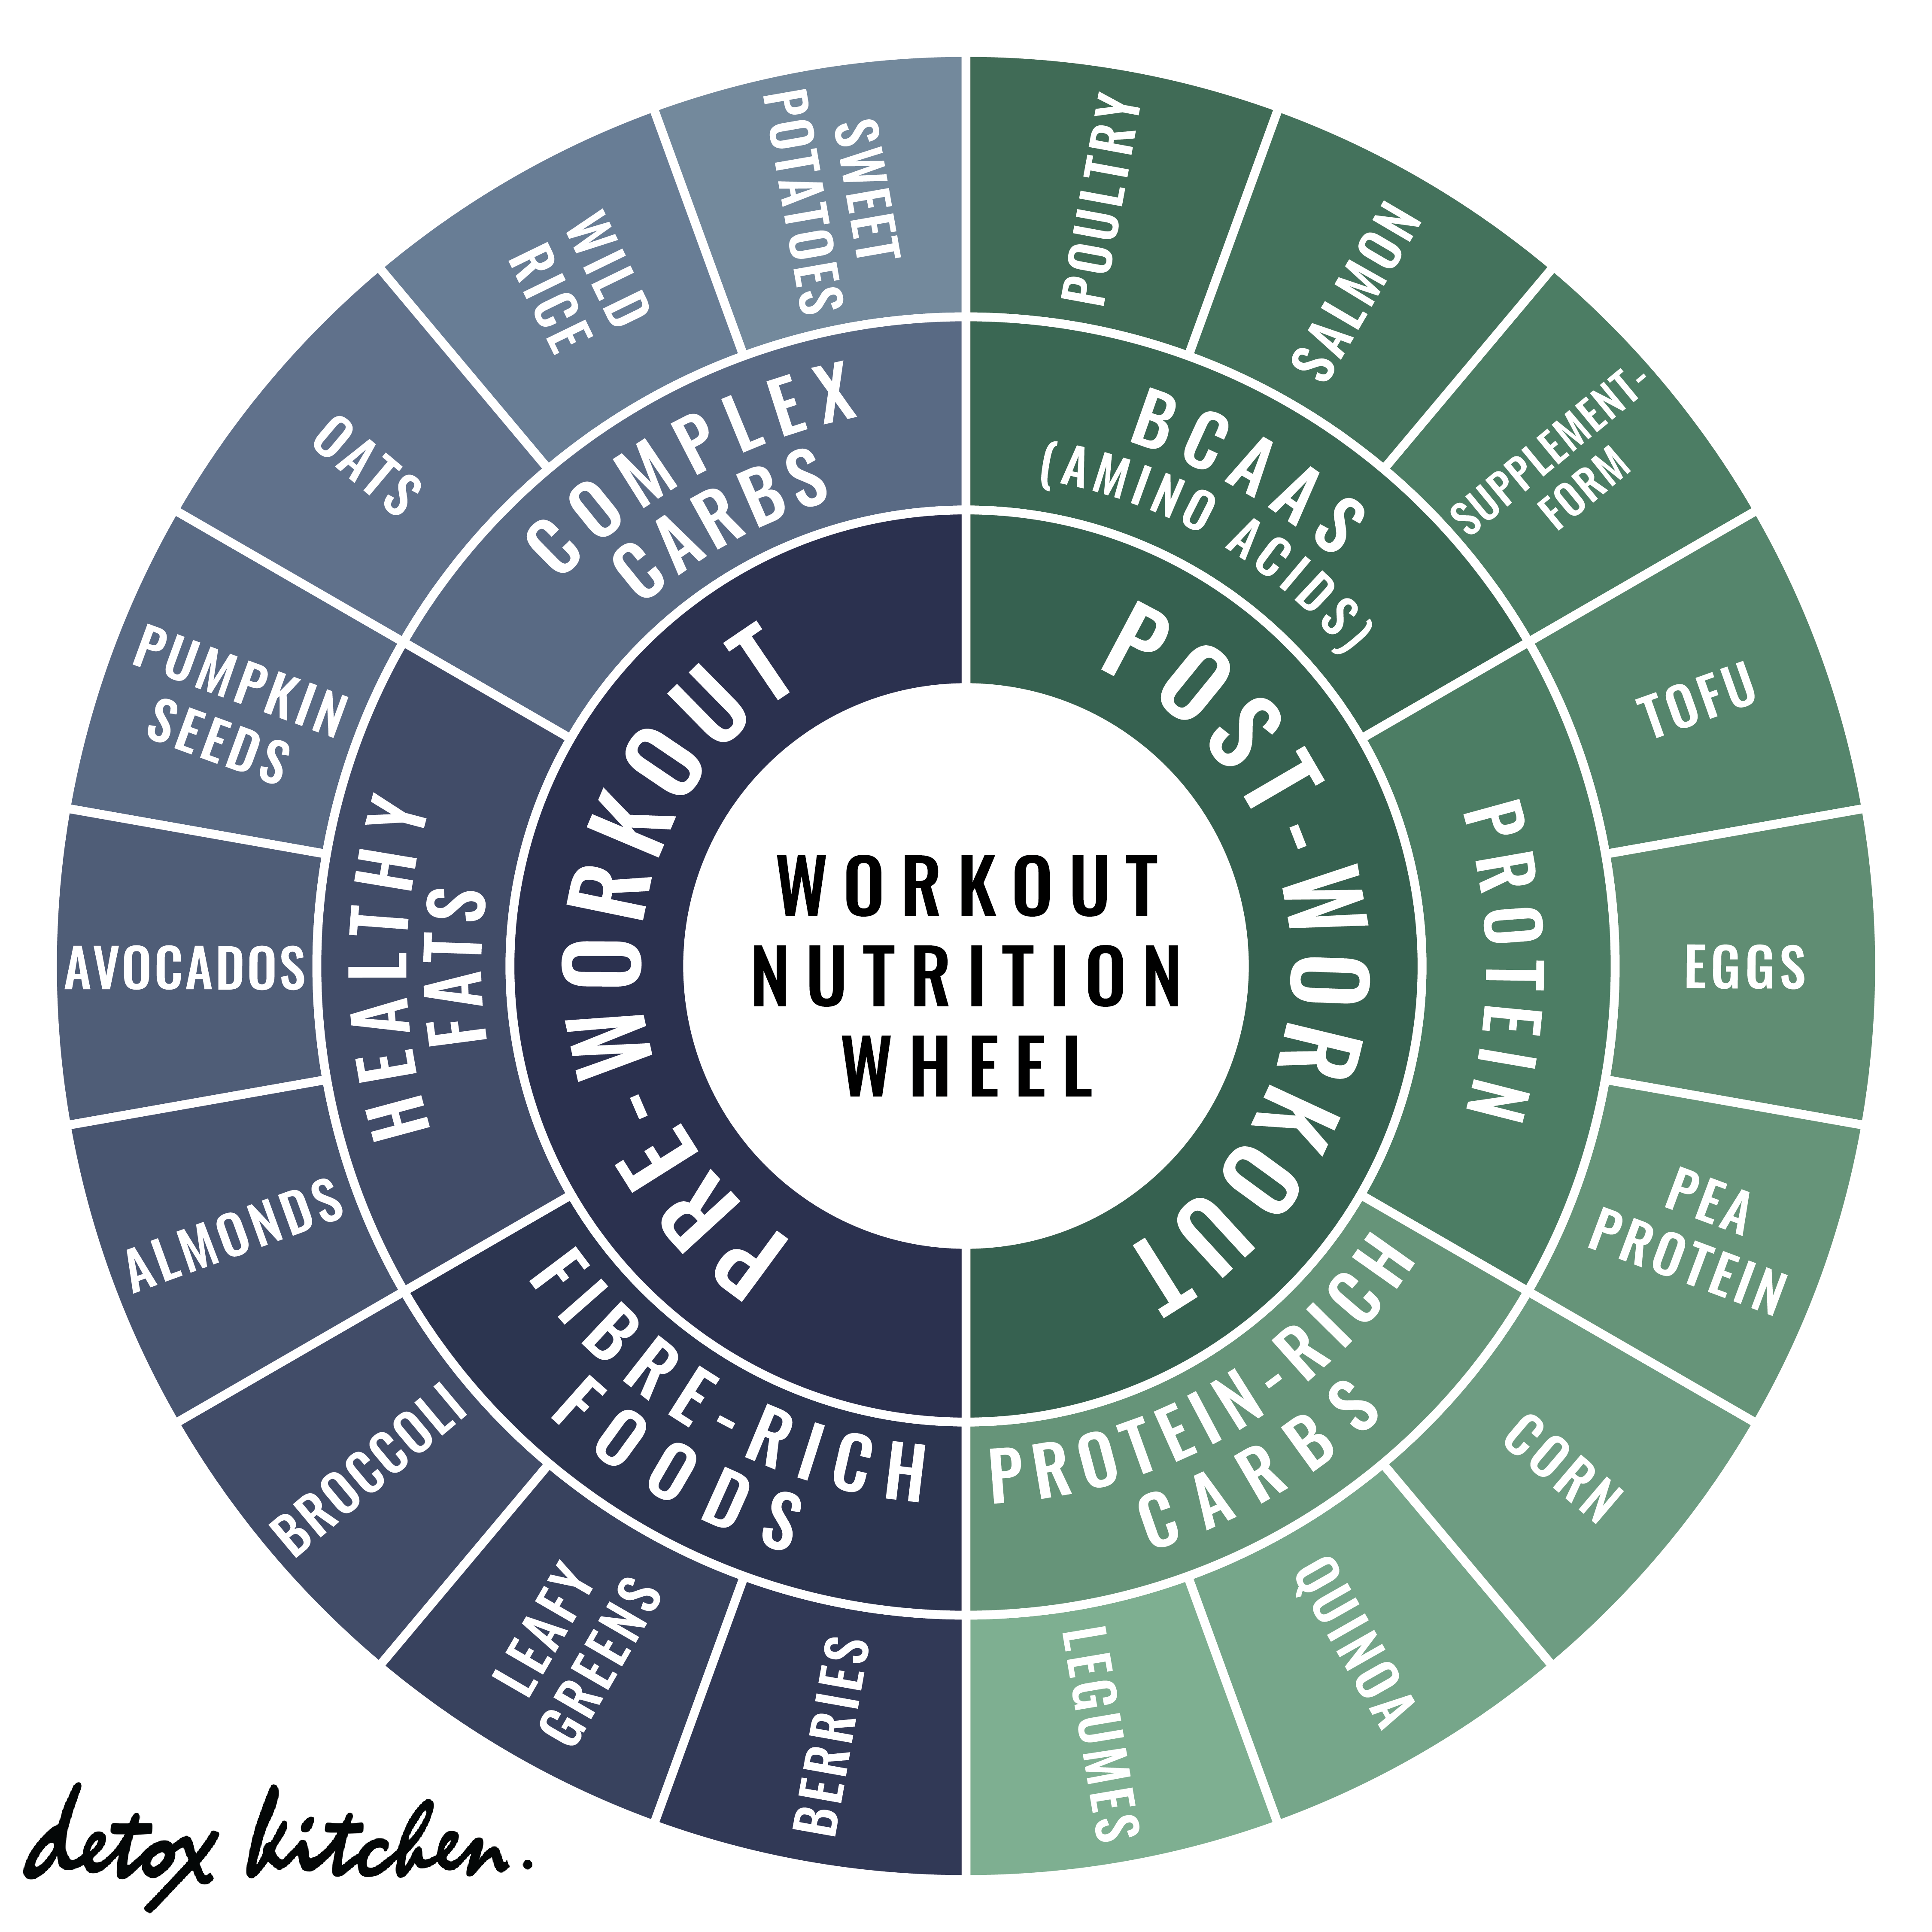 Bodyism's Guide to Workout Nutrition